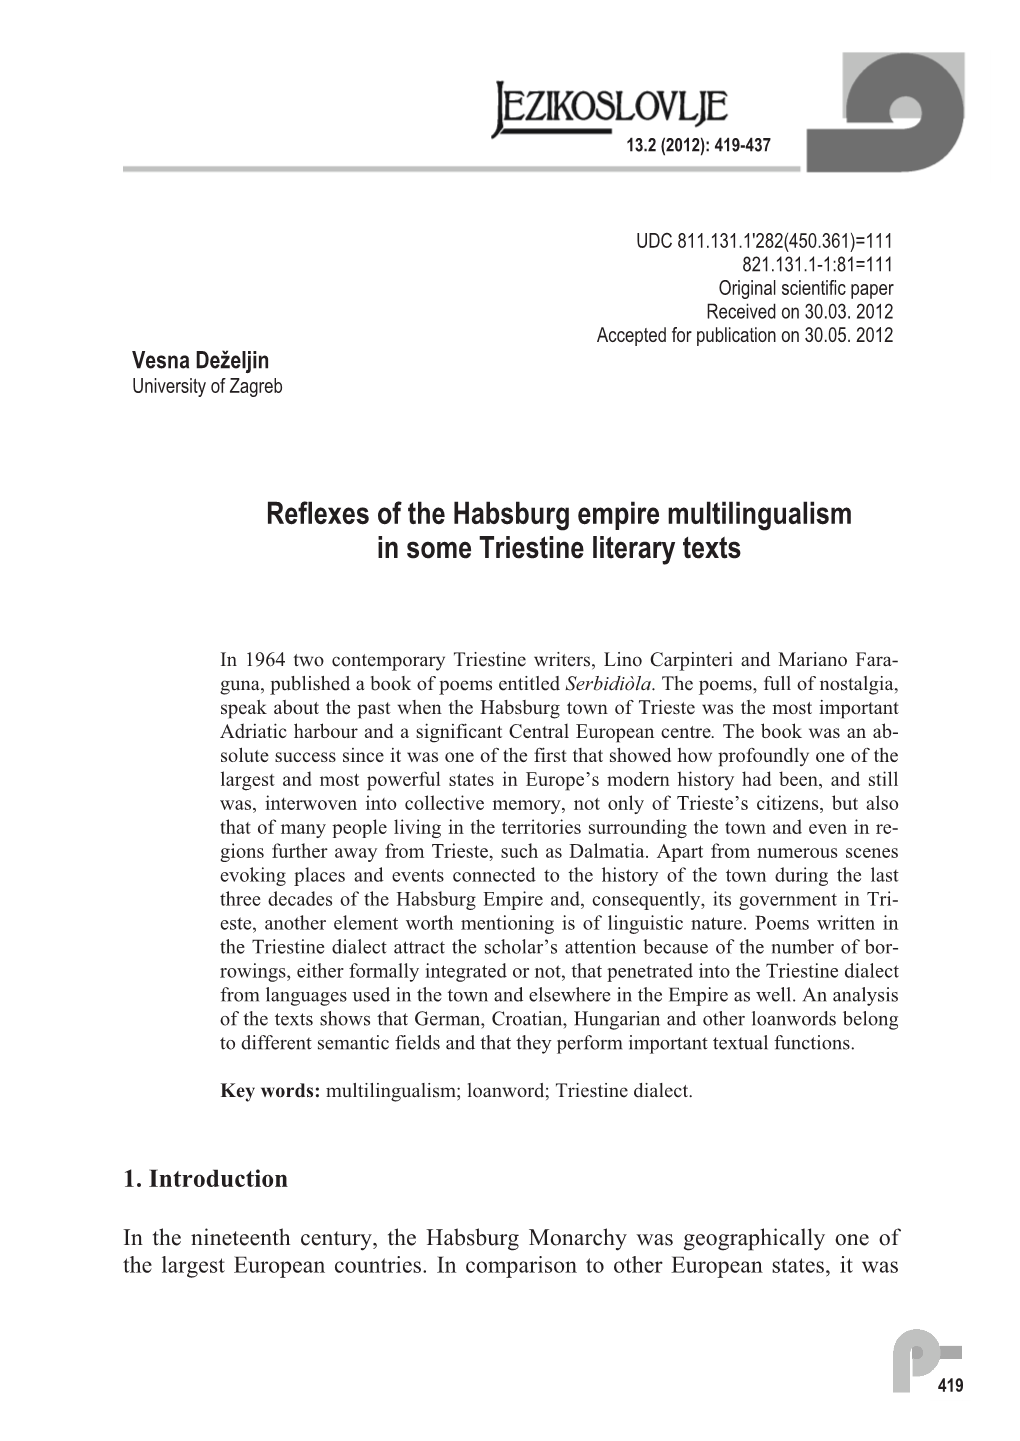 Reflexes of the Habsburg Empire Multilingualism in Some Triestine Literary Texts